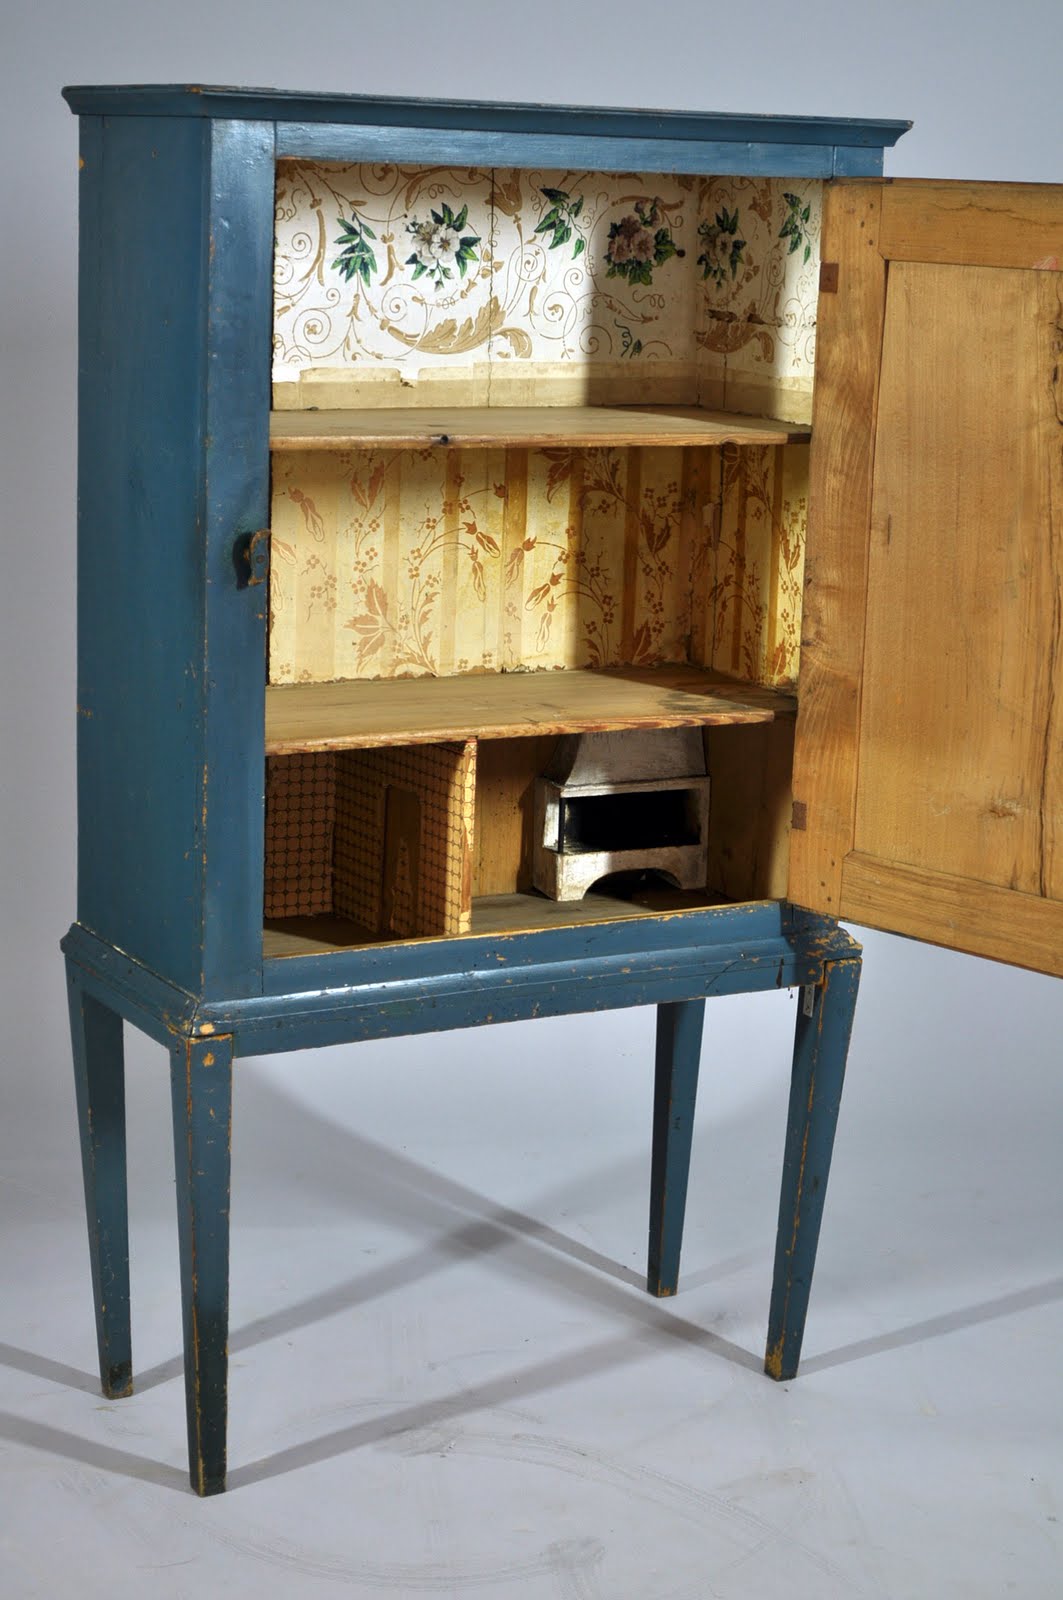 Another Great Way To Use Wallpaper Leftovers Saw This Old Dollhouse